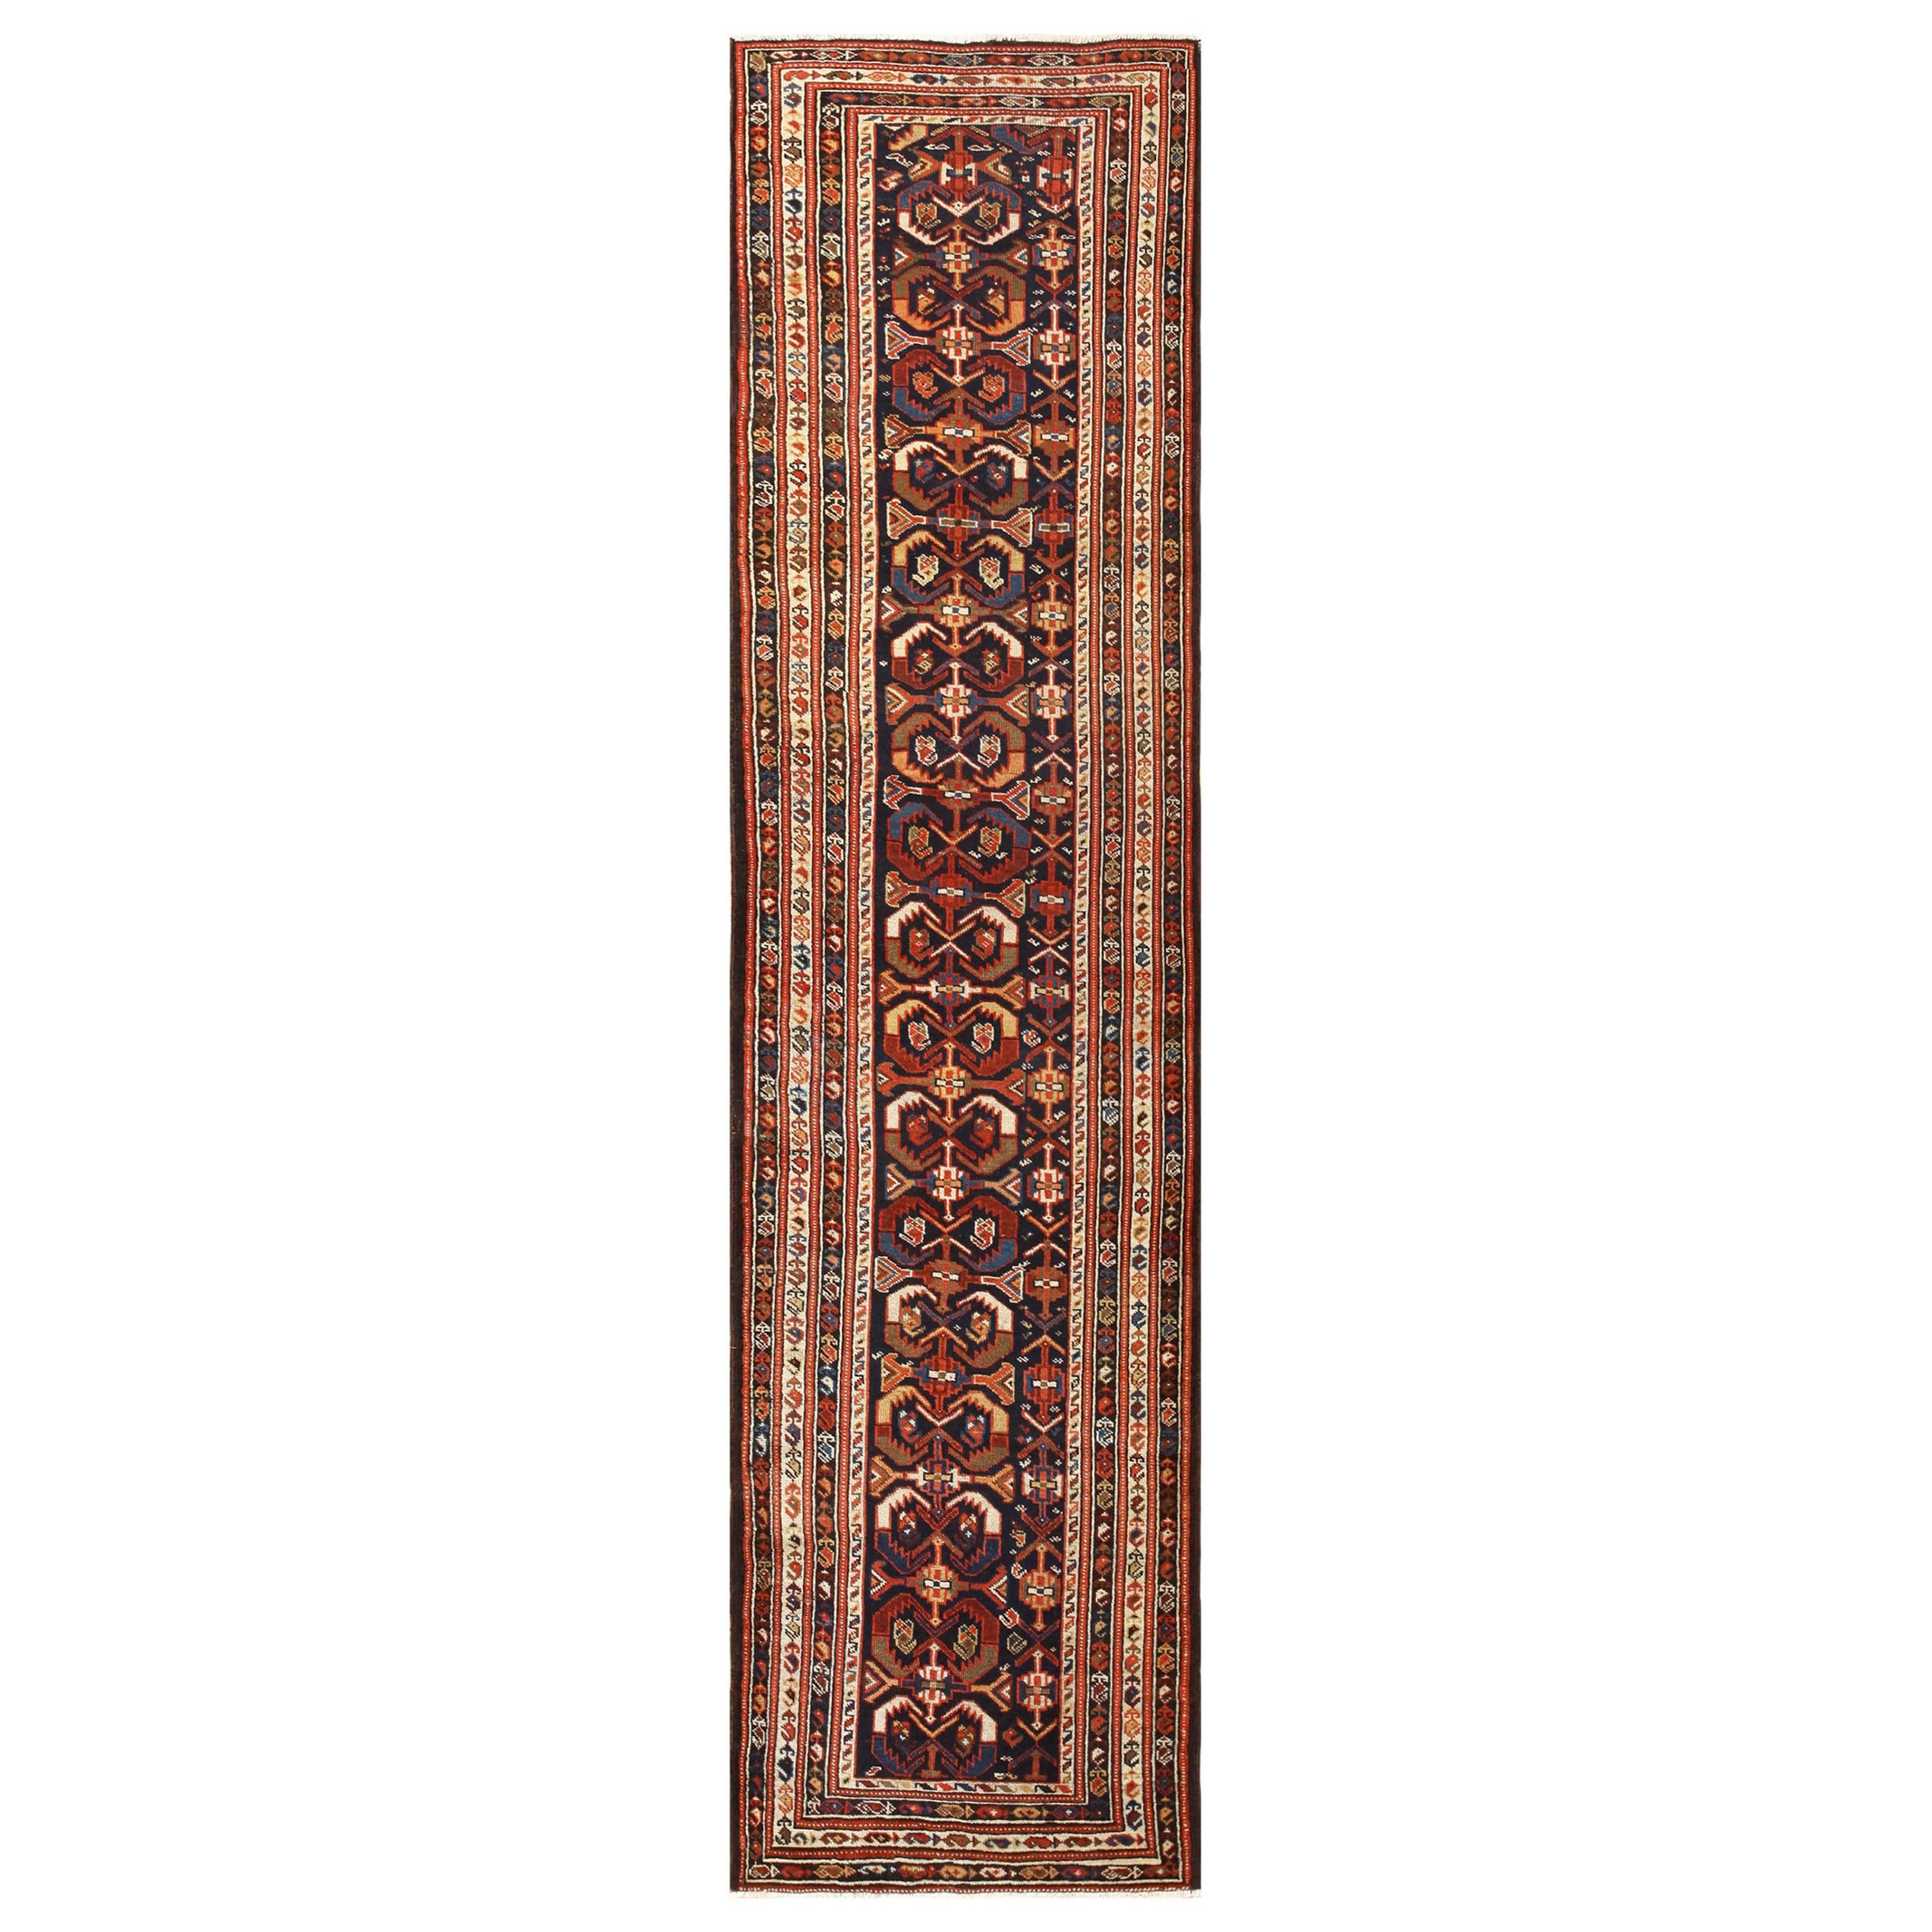 Beautifully Tribal Blue Herati Antique Persian Malayer Runner Rug 3' x 10'10" For Sale